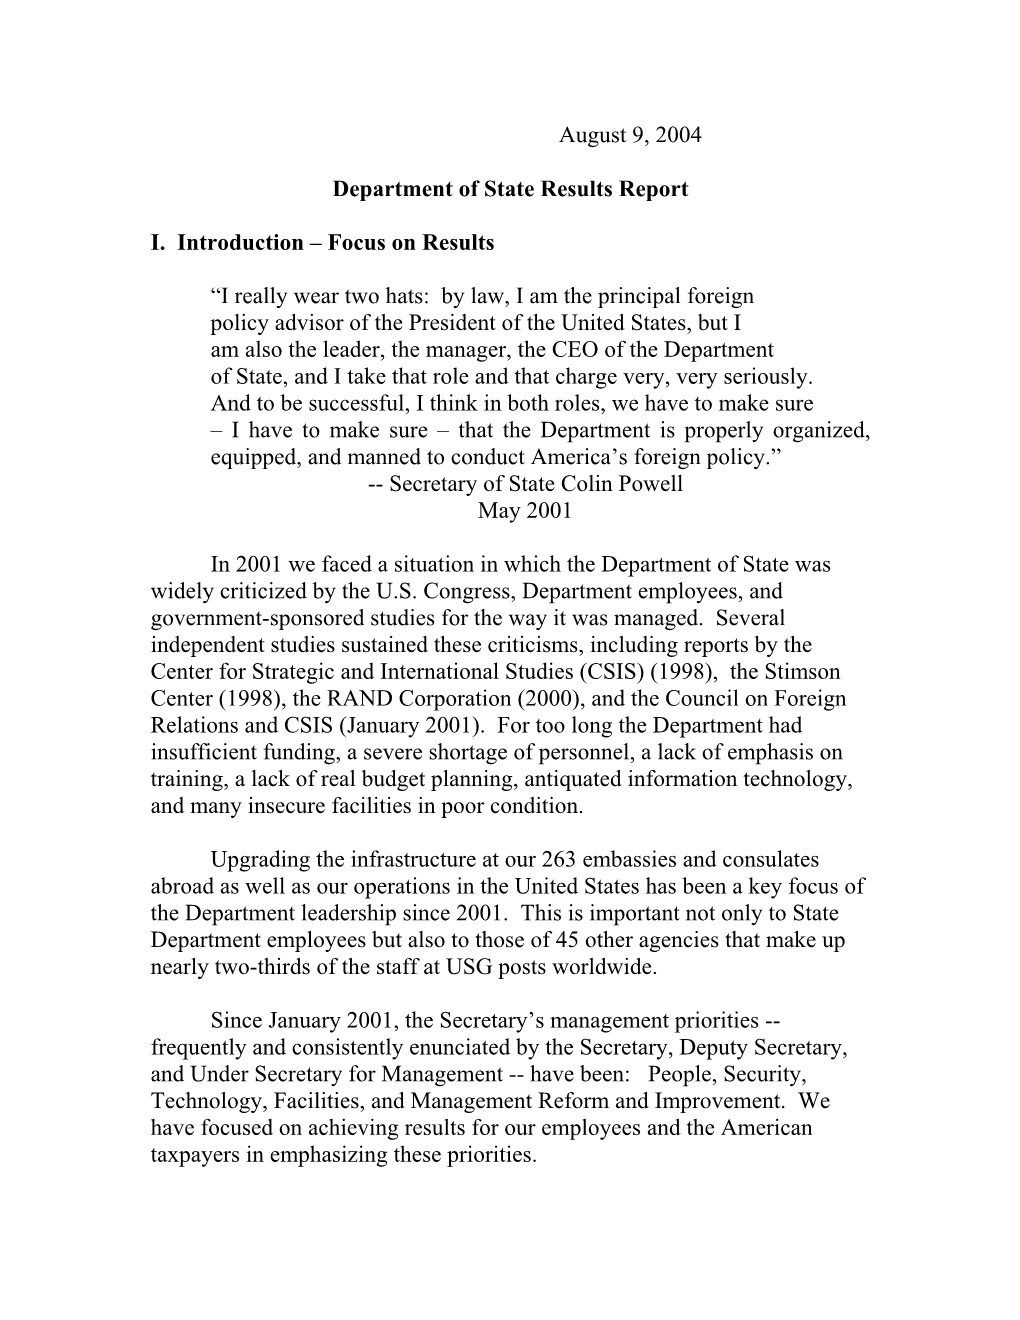 August 9, 2004 Department of State Results Report I. Introduction – Focus on Results “I Really Wear Two Hats: by Law, I Am T